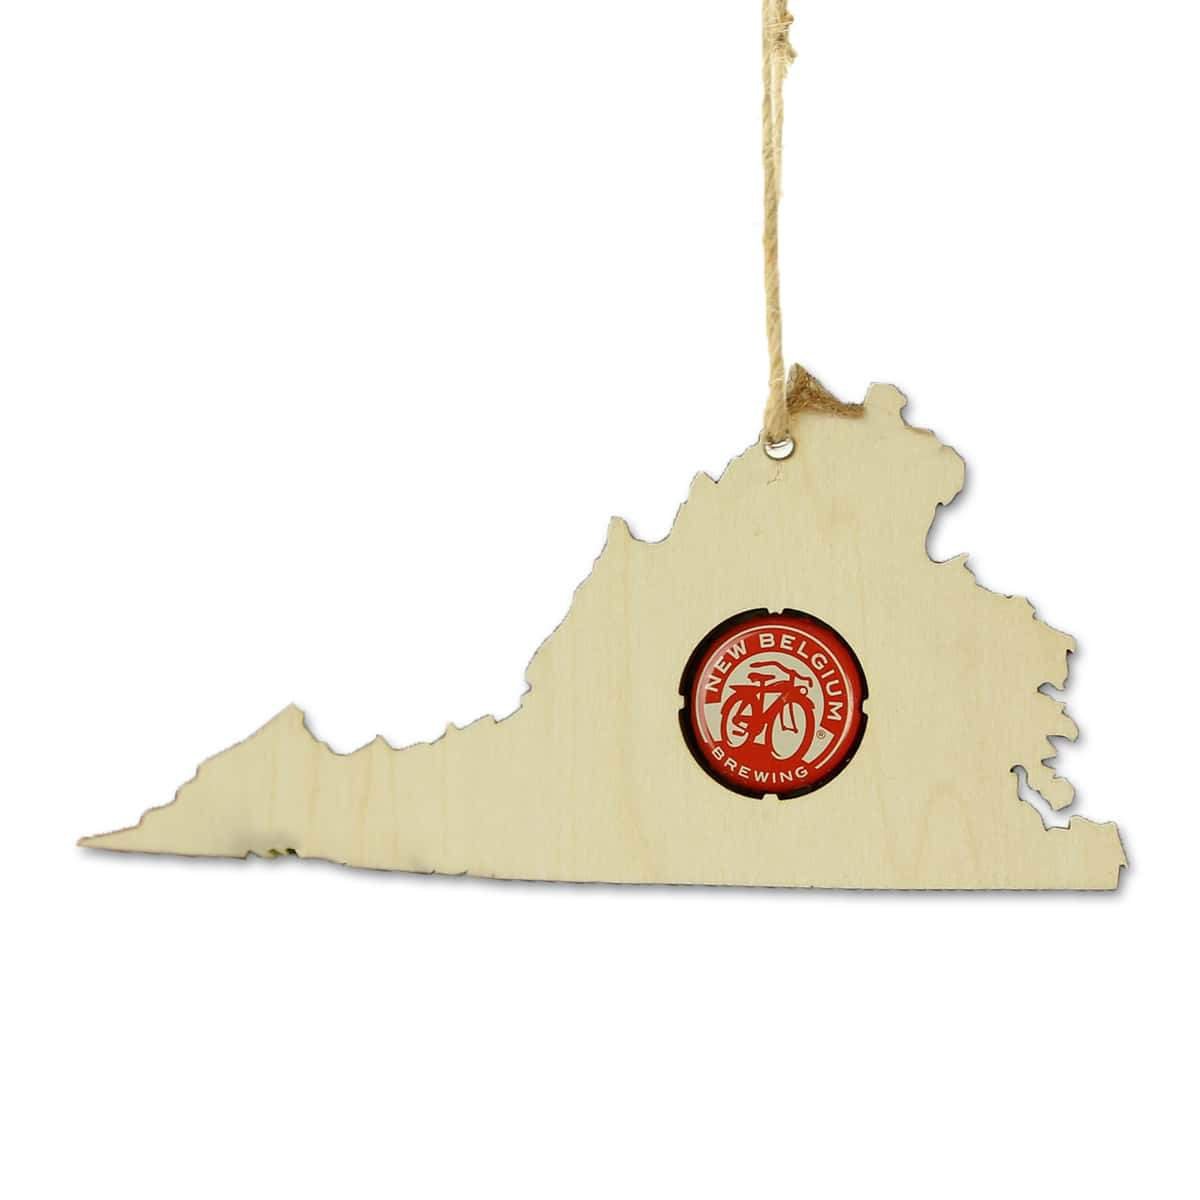 Torched Products Beer Cap Maps Virginia Beer Cap Map Ornaments (781576765557)